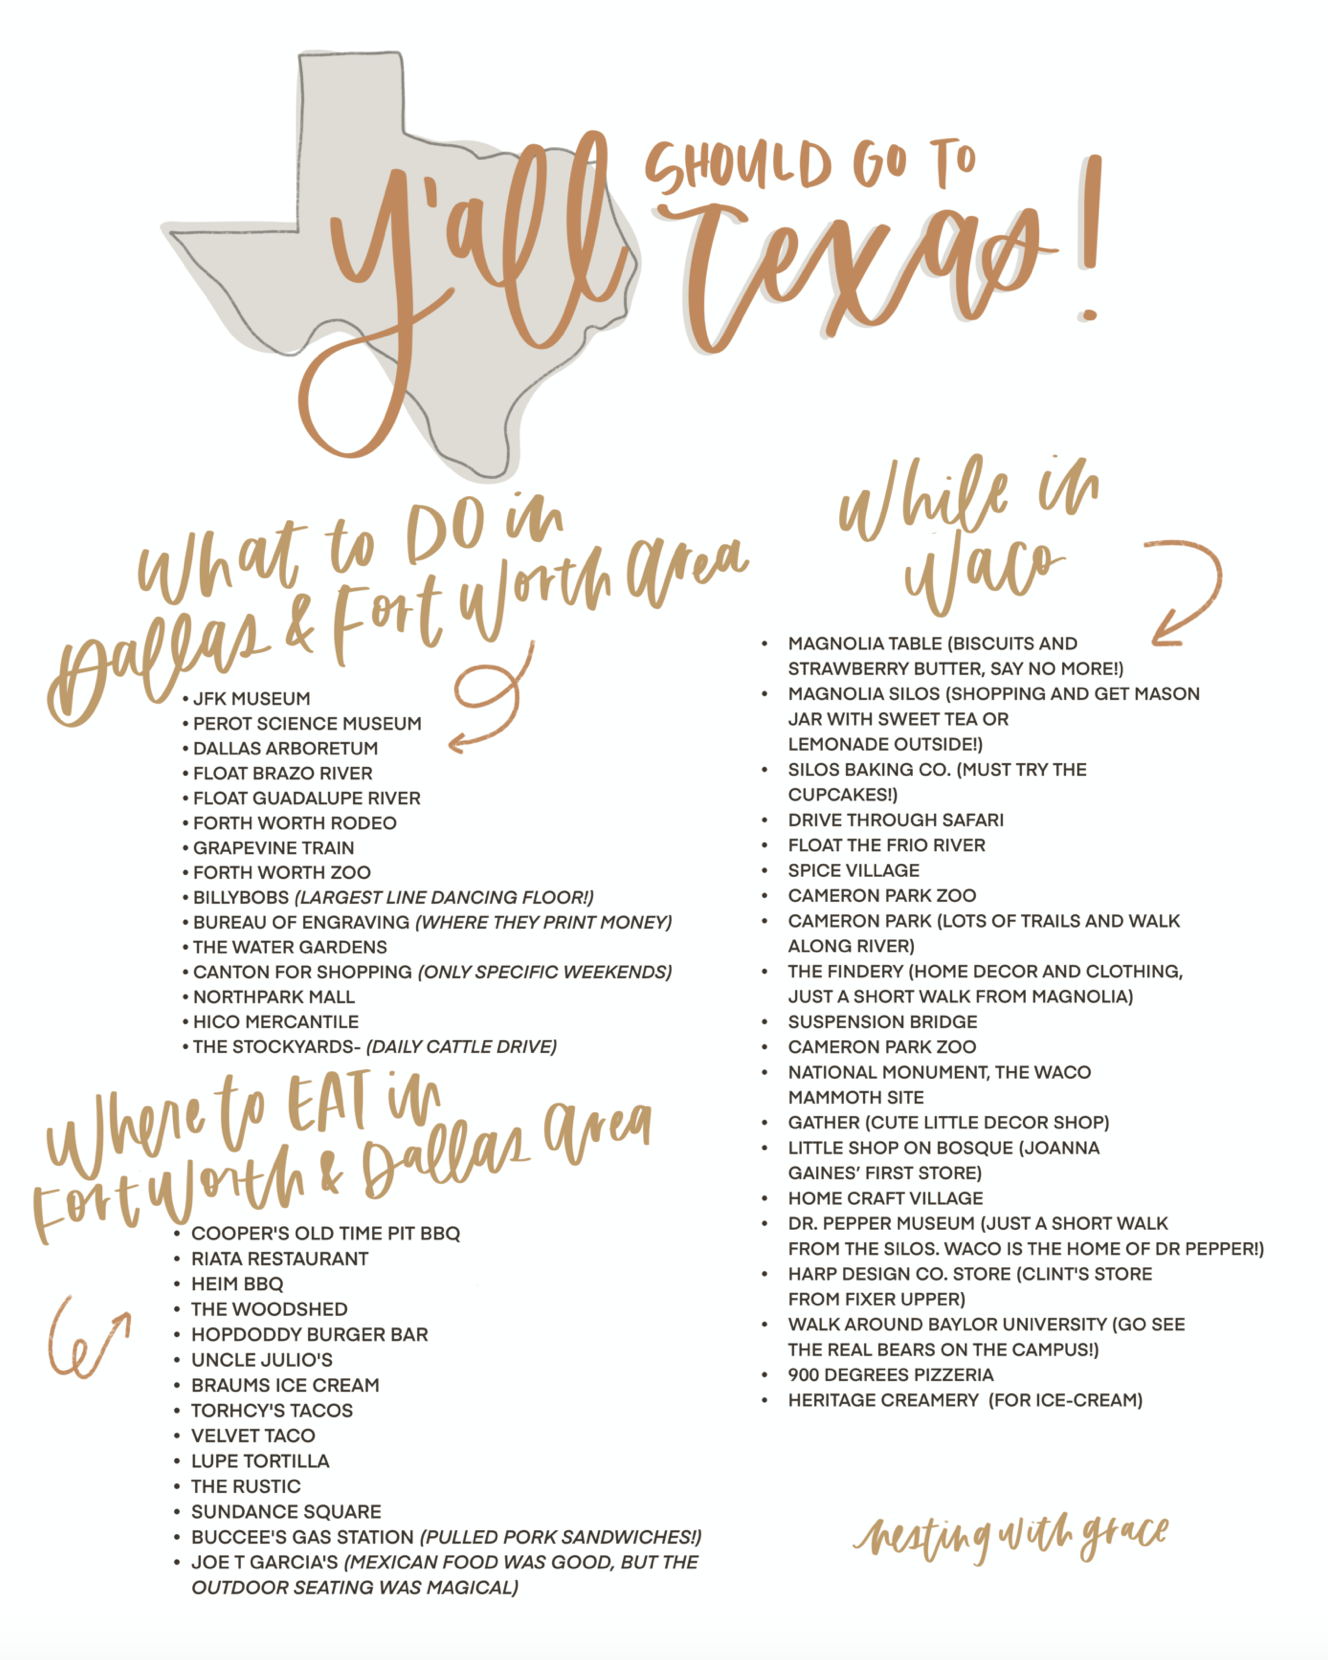 Favorite things to do at Magnolia- What to do in Fort Worth Texas- Wacco Texas- Silos